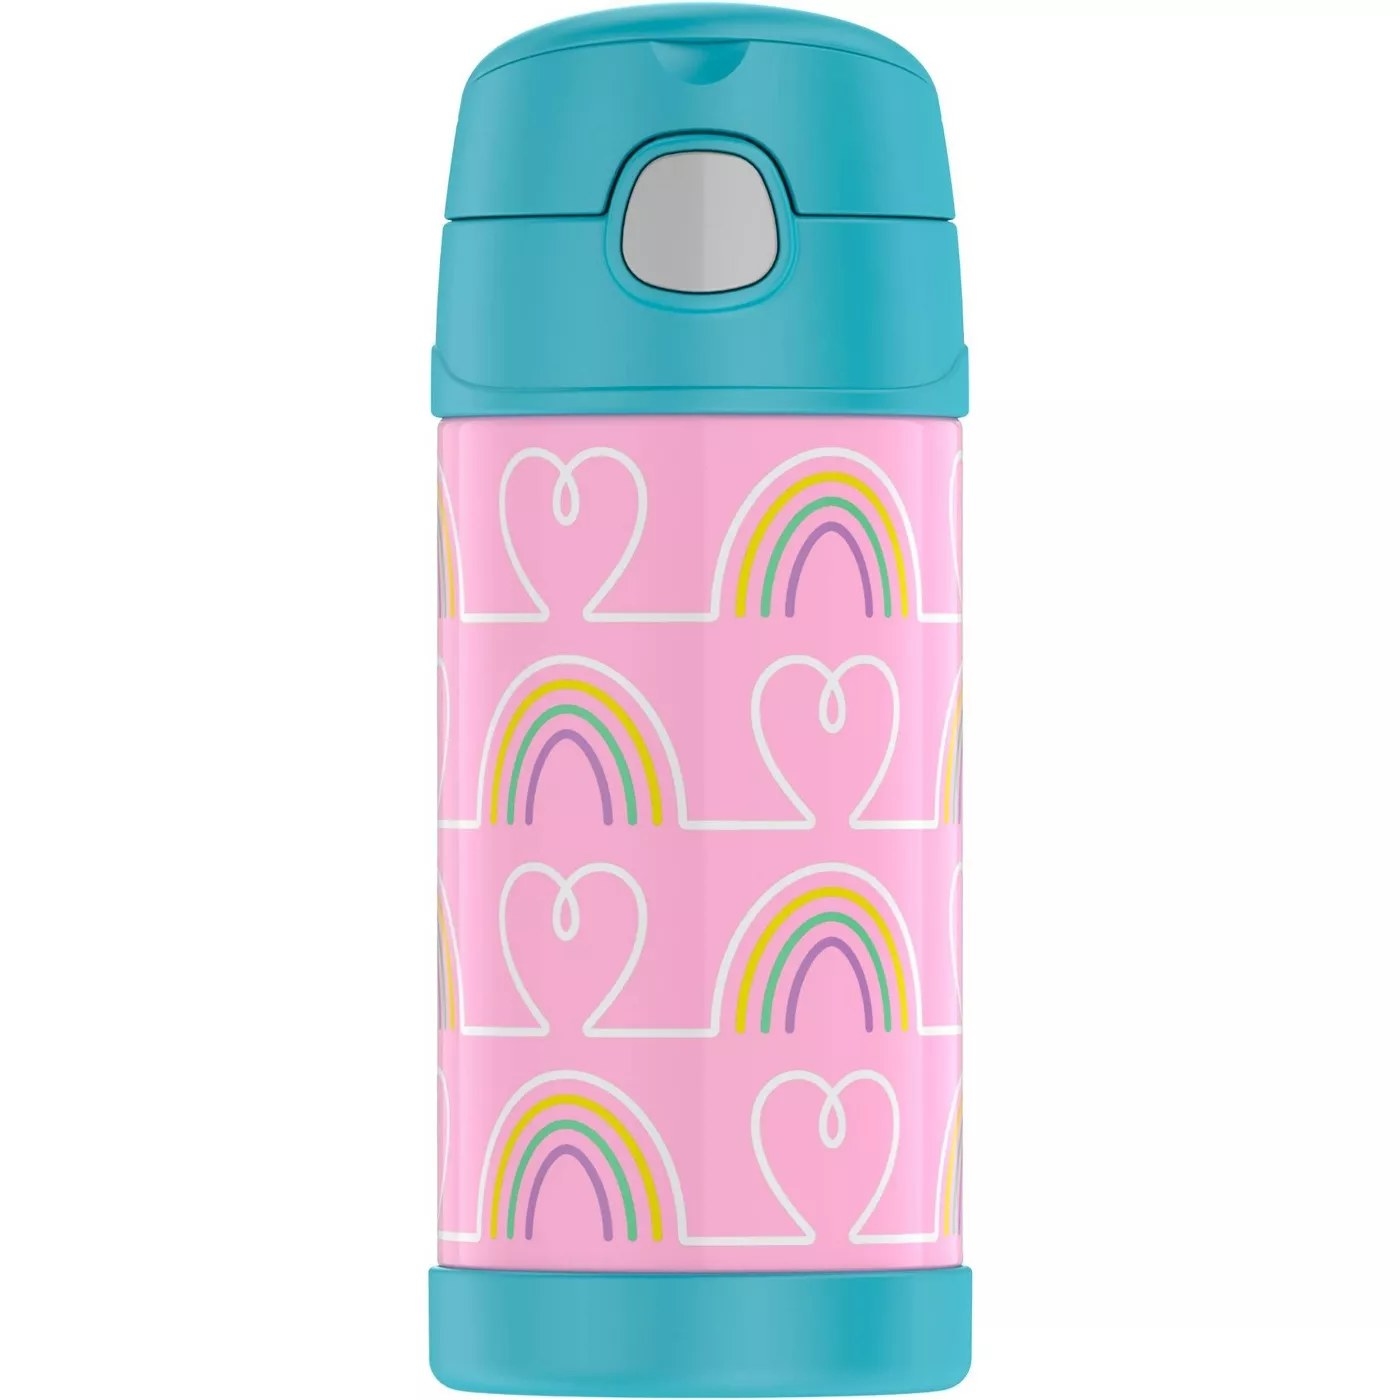 The pink and blue Thermos with a rainbow-heart pattern